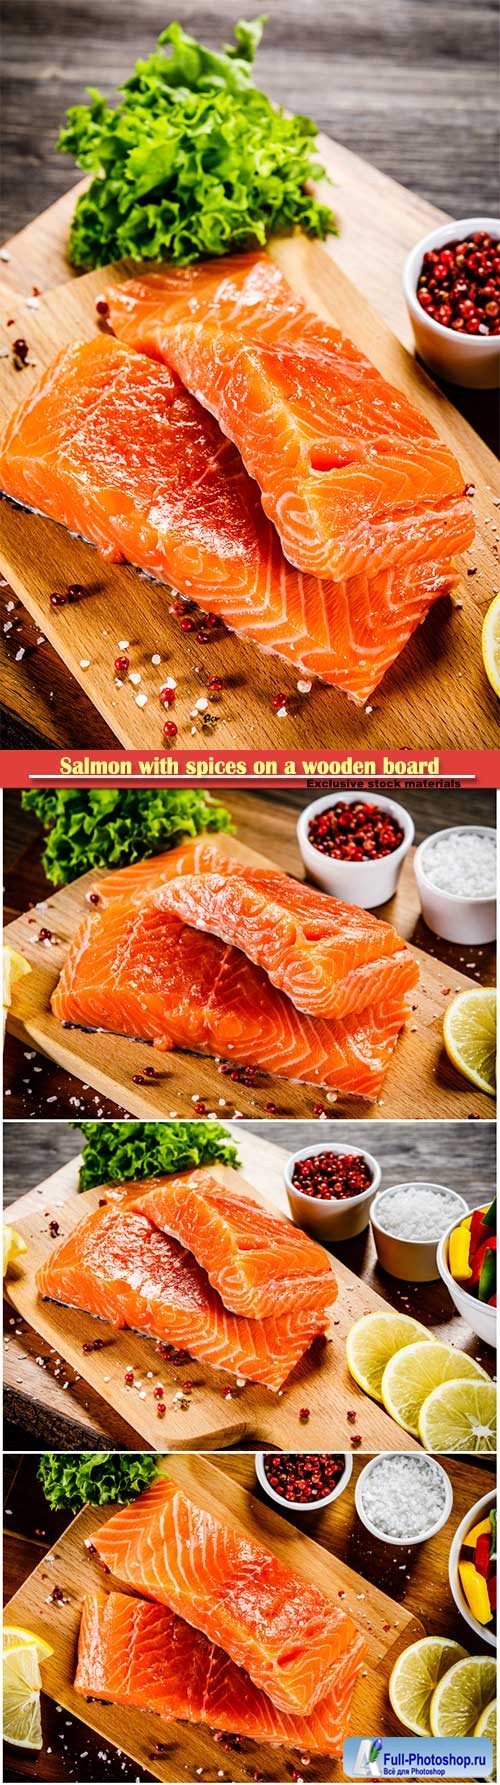 Salmon with spices on a wooden board